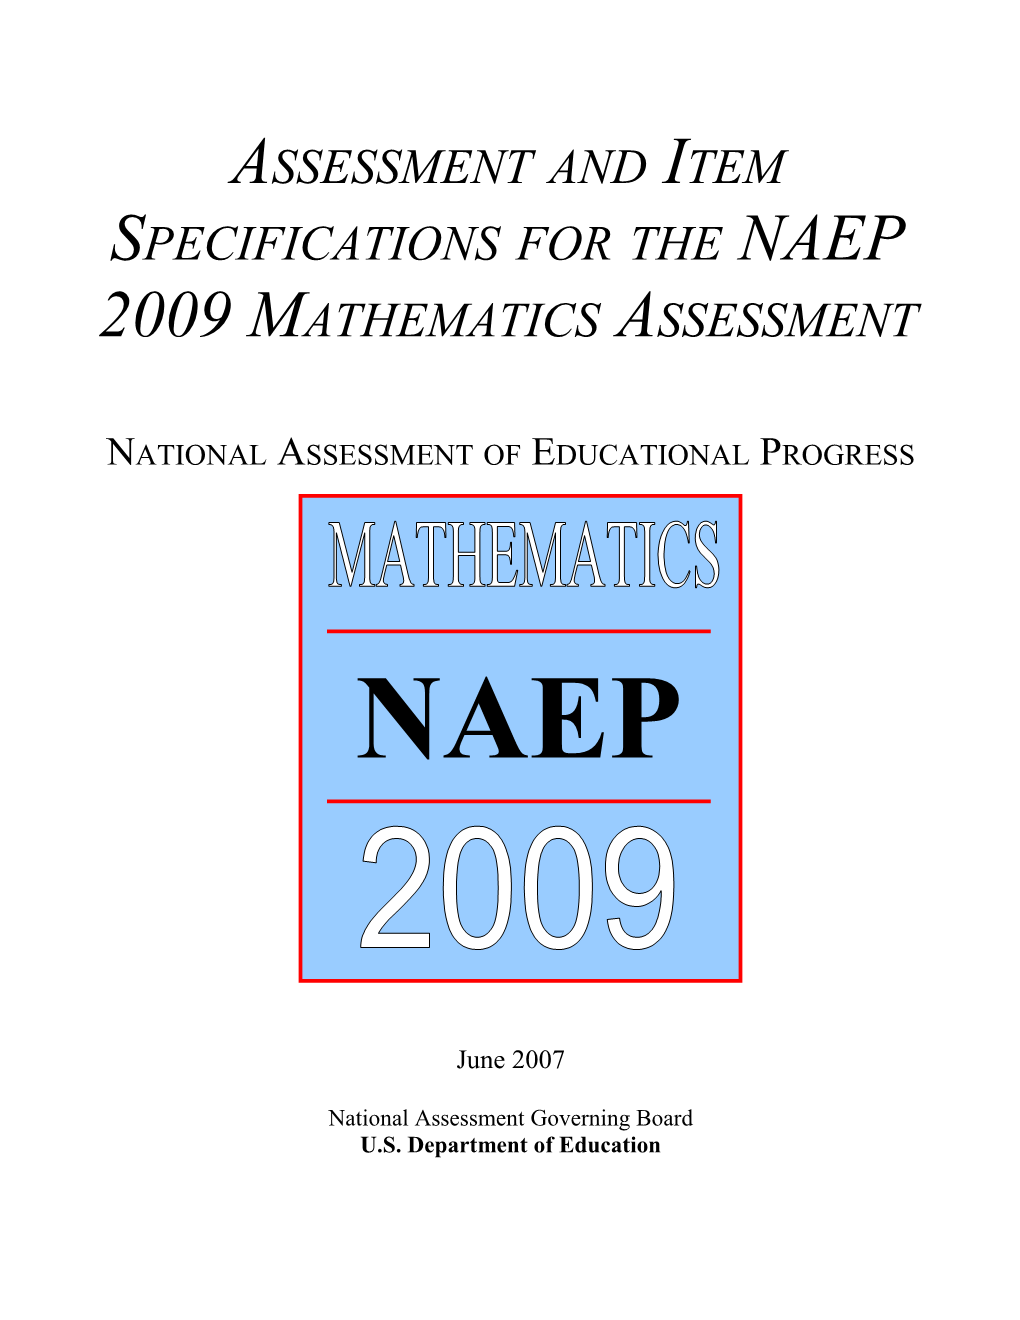 Assessment and Item Specifications for the NAEP 2009 Mathematics Assessment